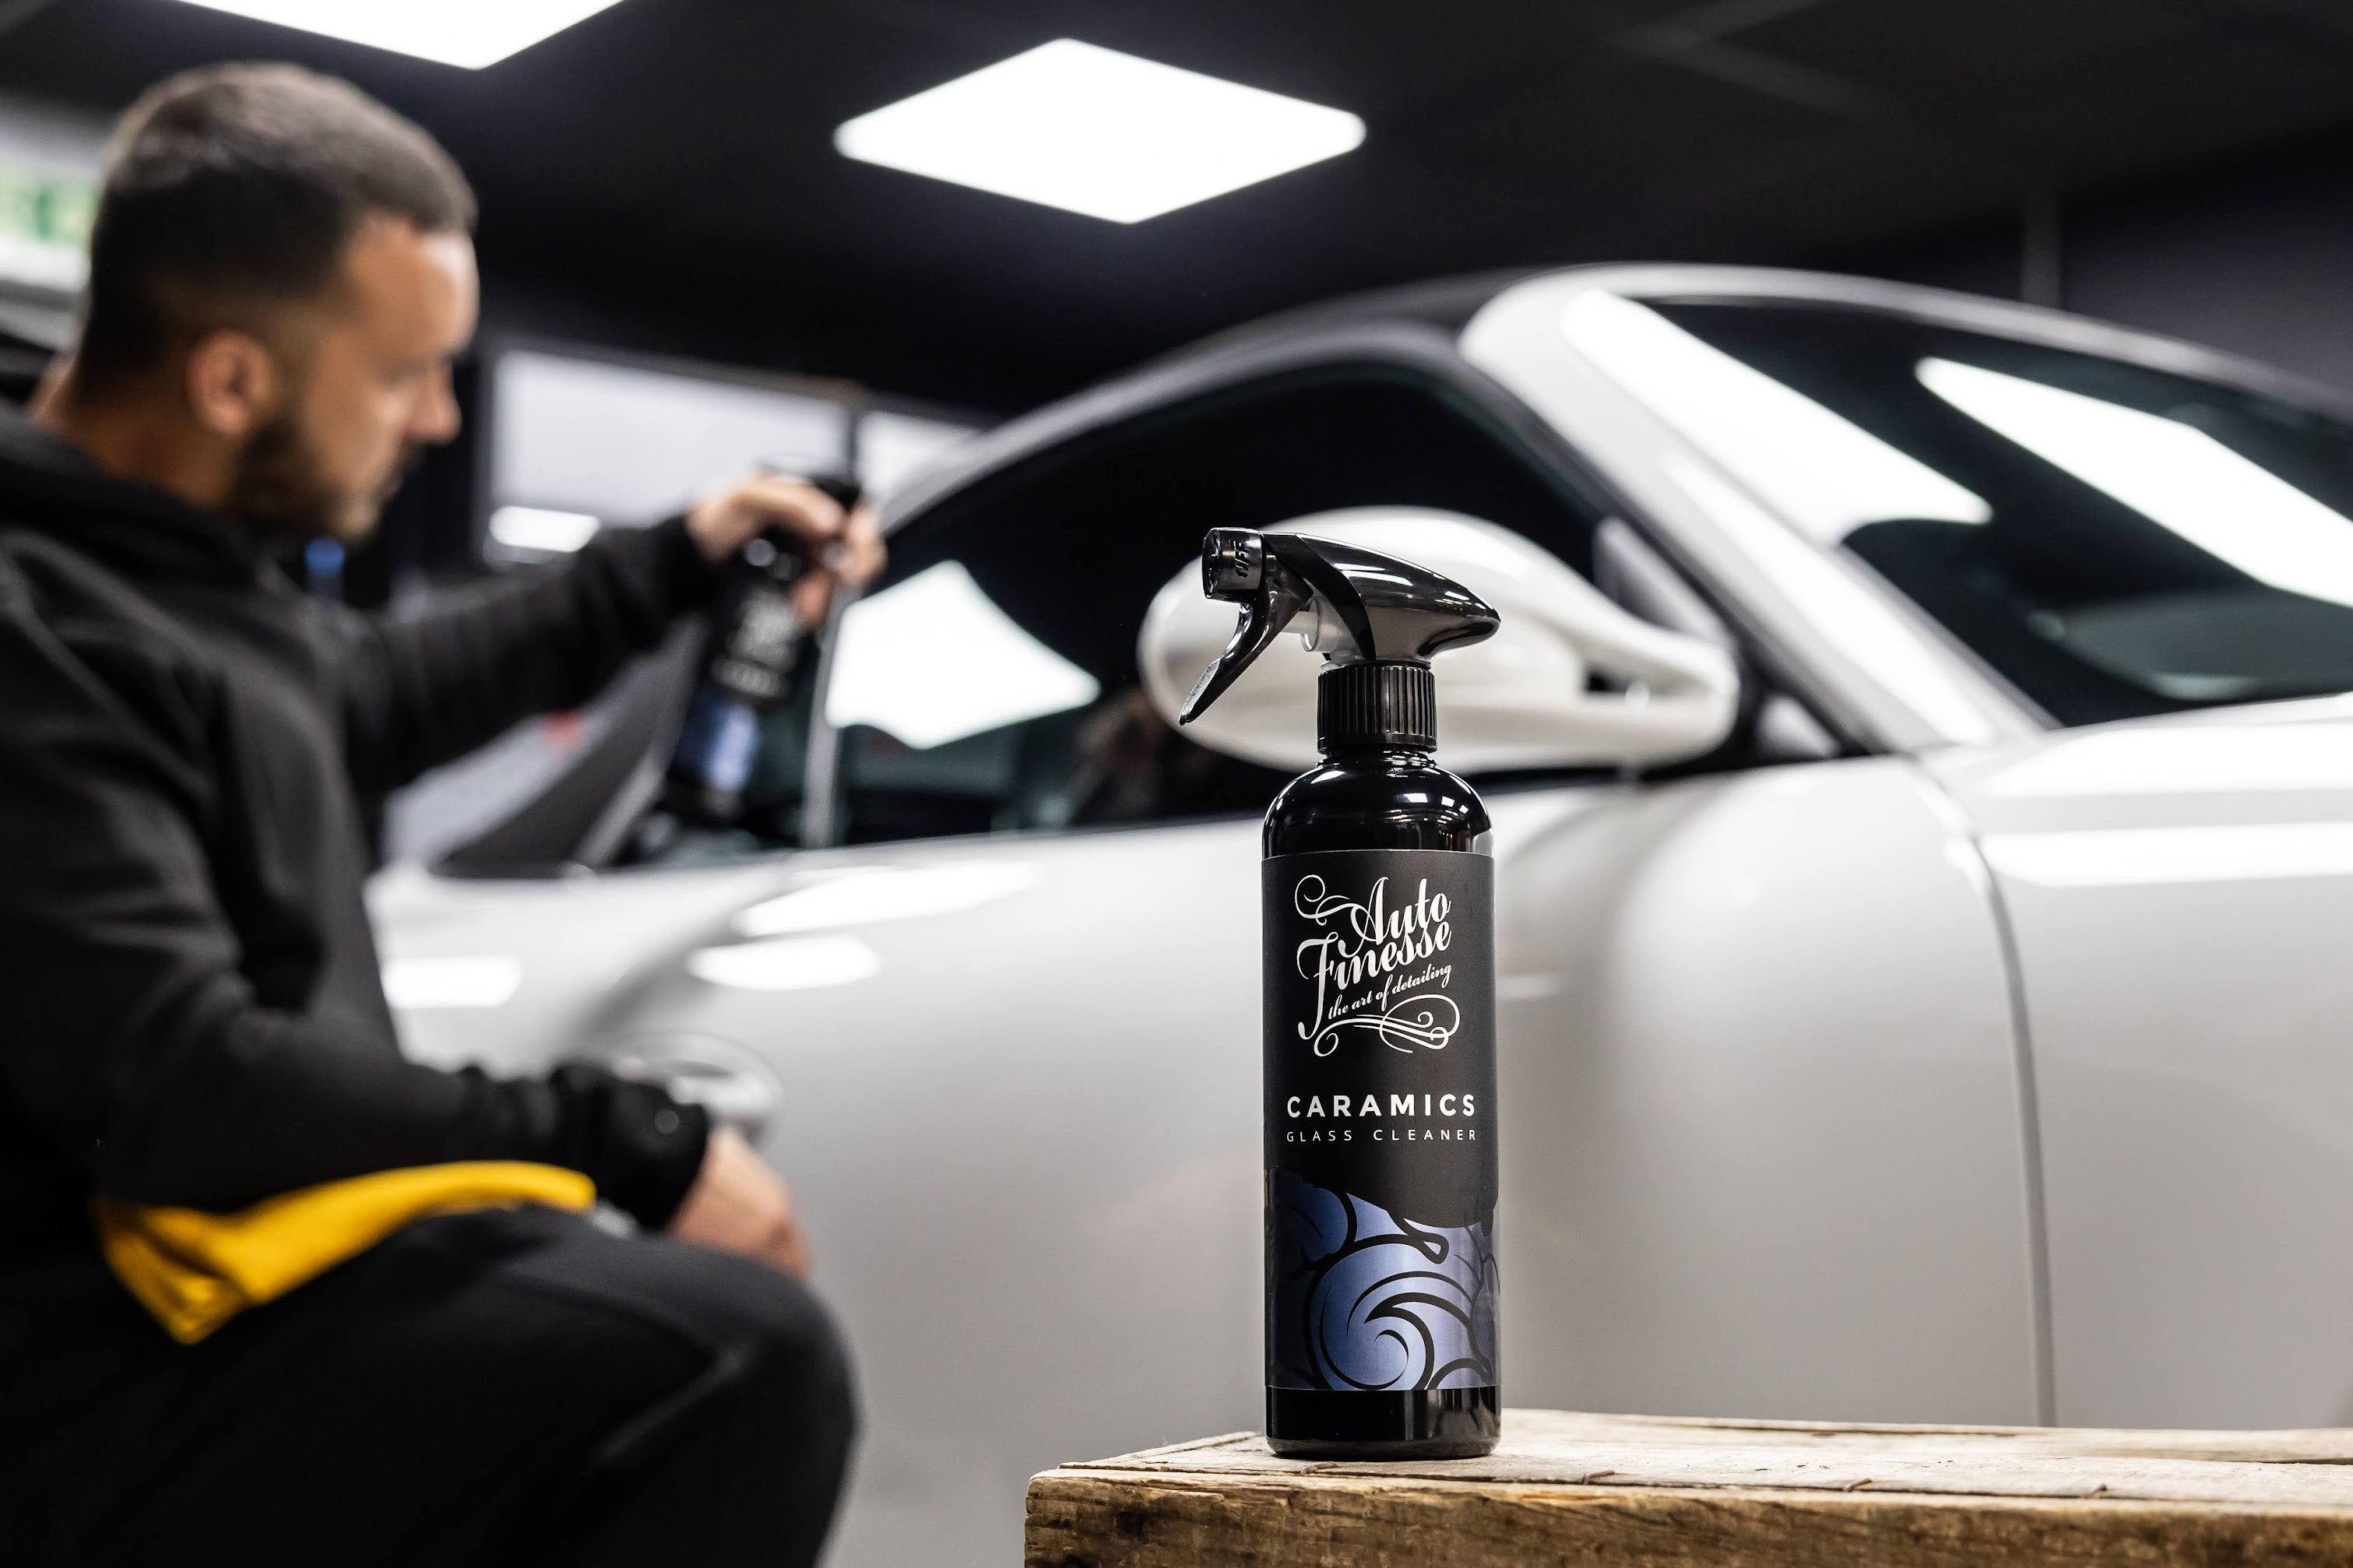 Glass Coating Agent For Car 550ML Car Detailing Ceramic Coating Car  Products Ceramic Coating Glass Ceramic Panel Protection